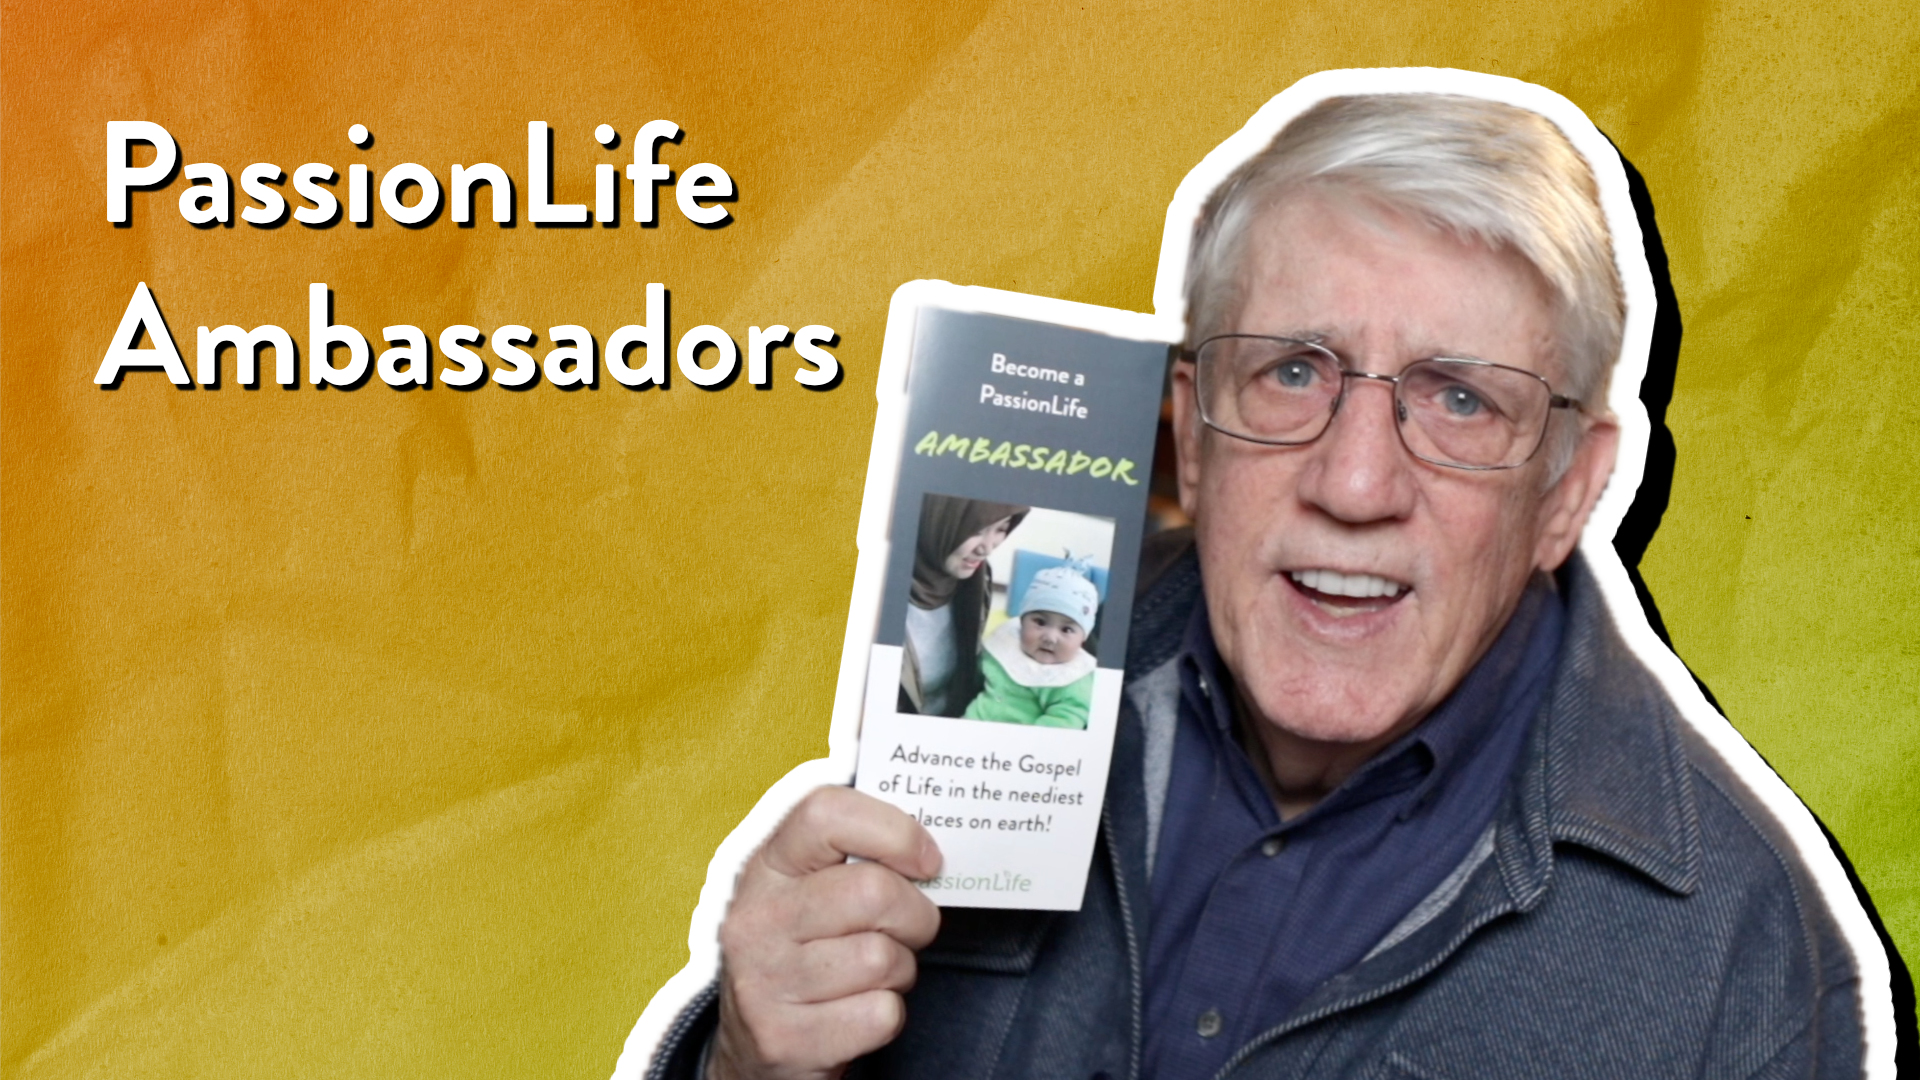 What it means to be a PassionLife Ambassador